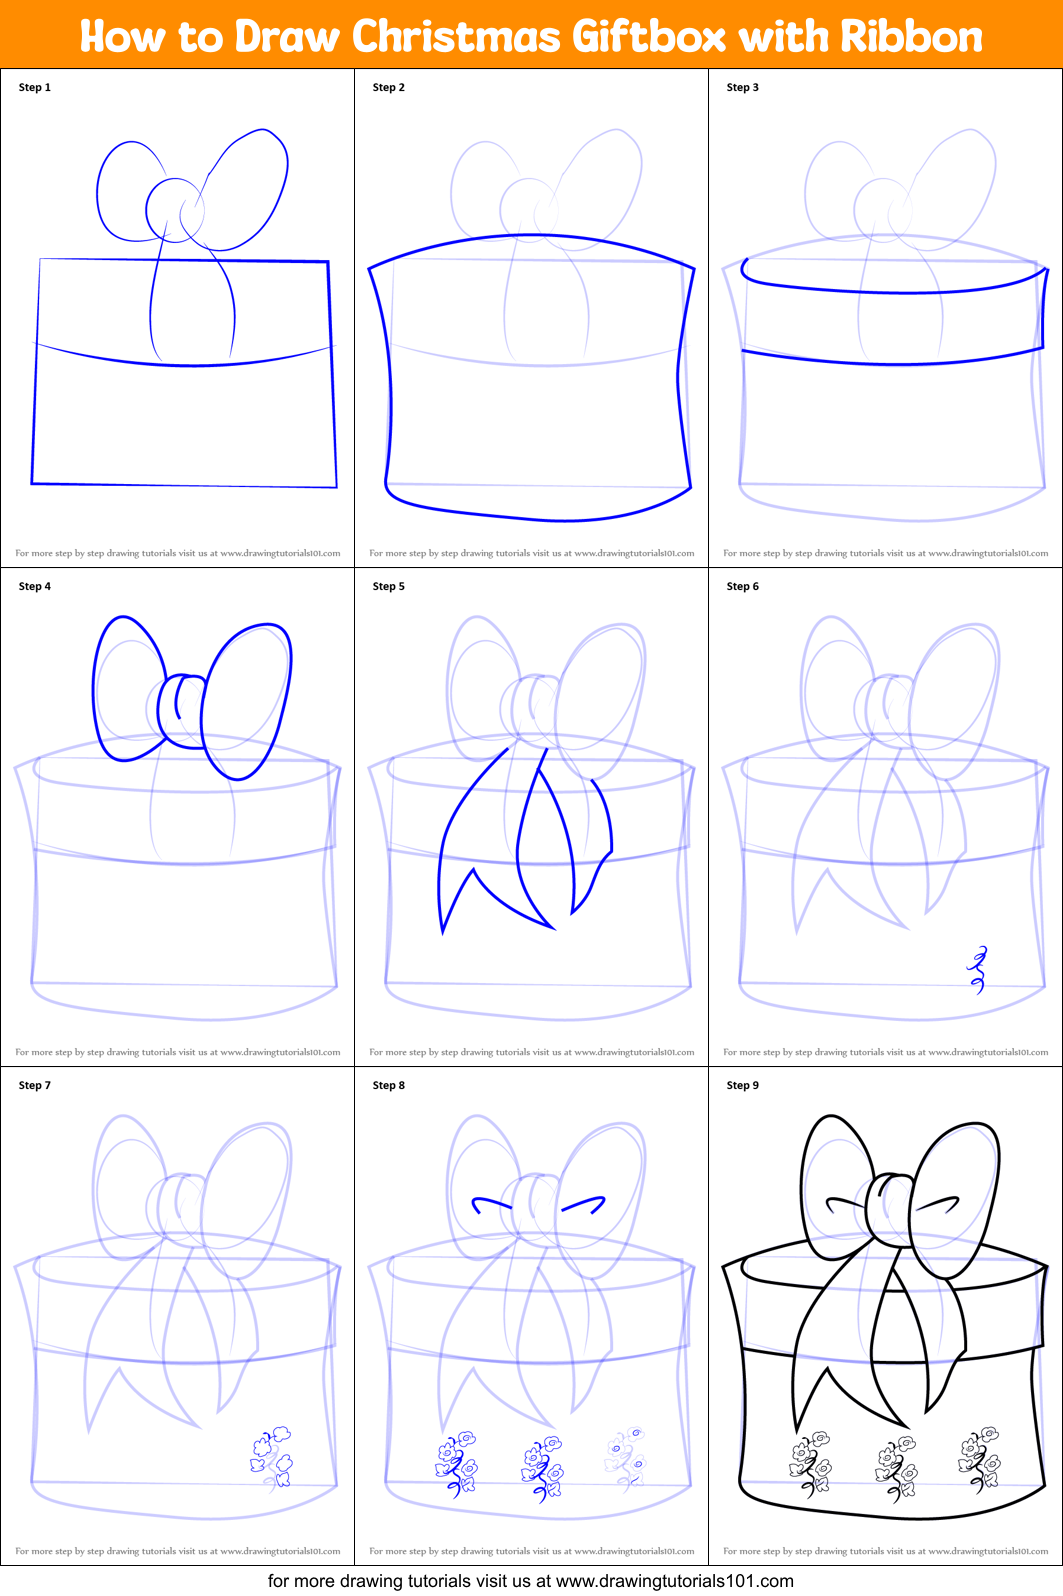 How to Draw Christmas Giftbox with Ribbon (Christmas) Step by Step